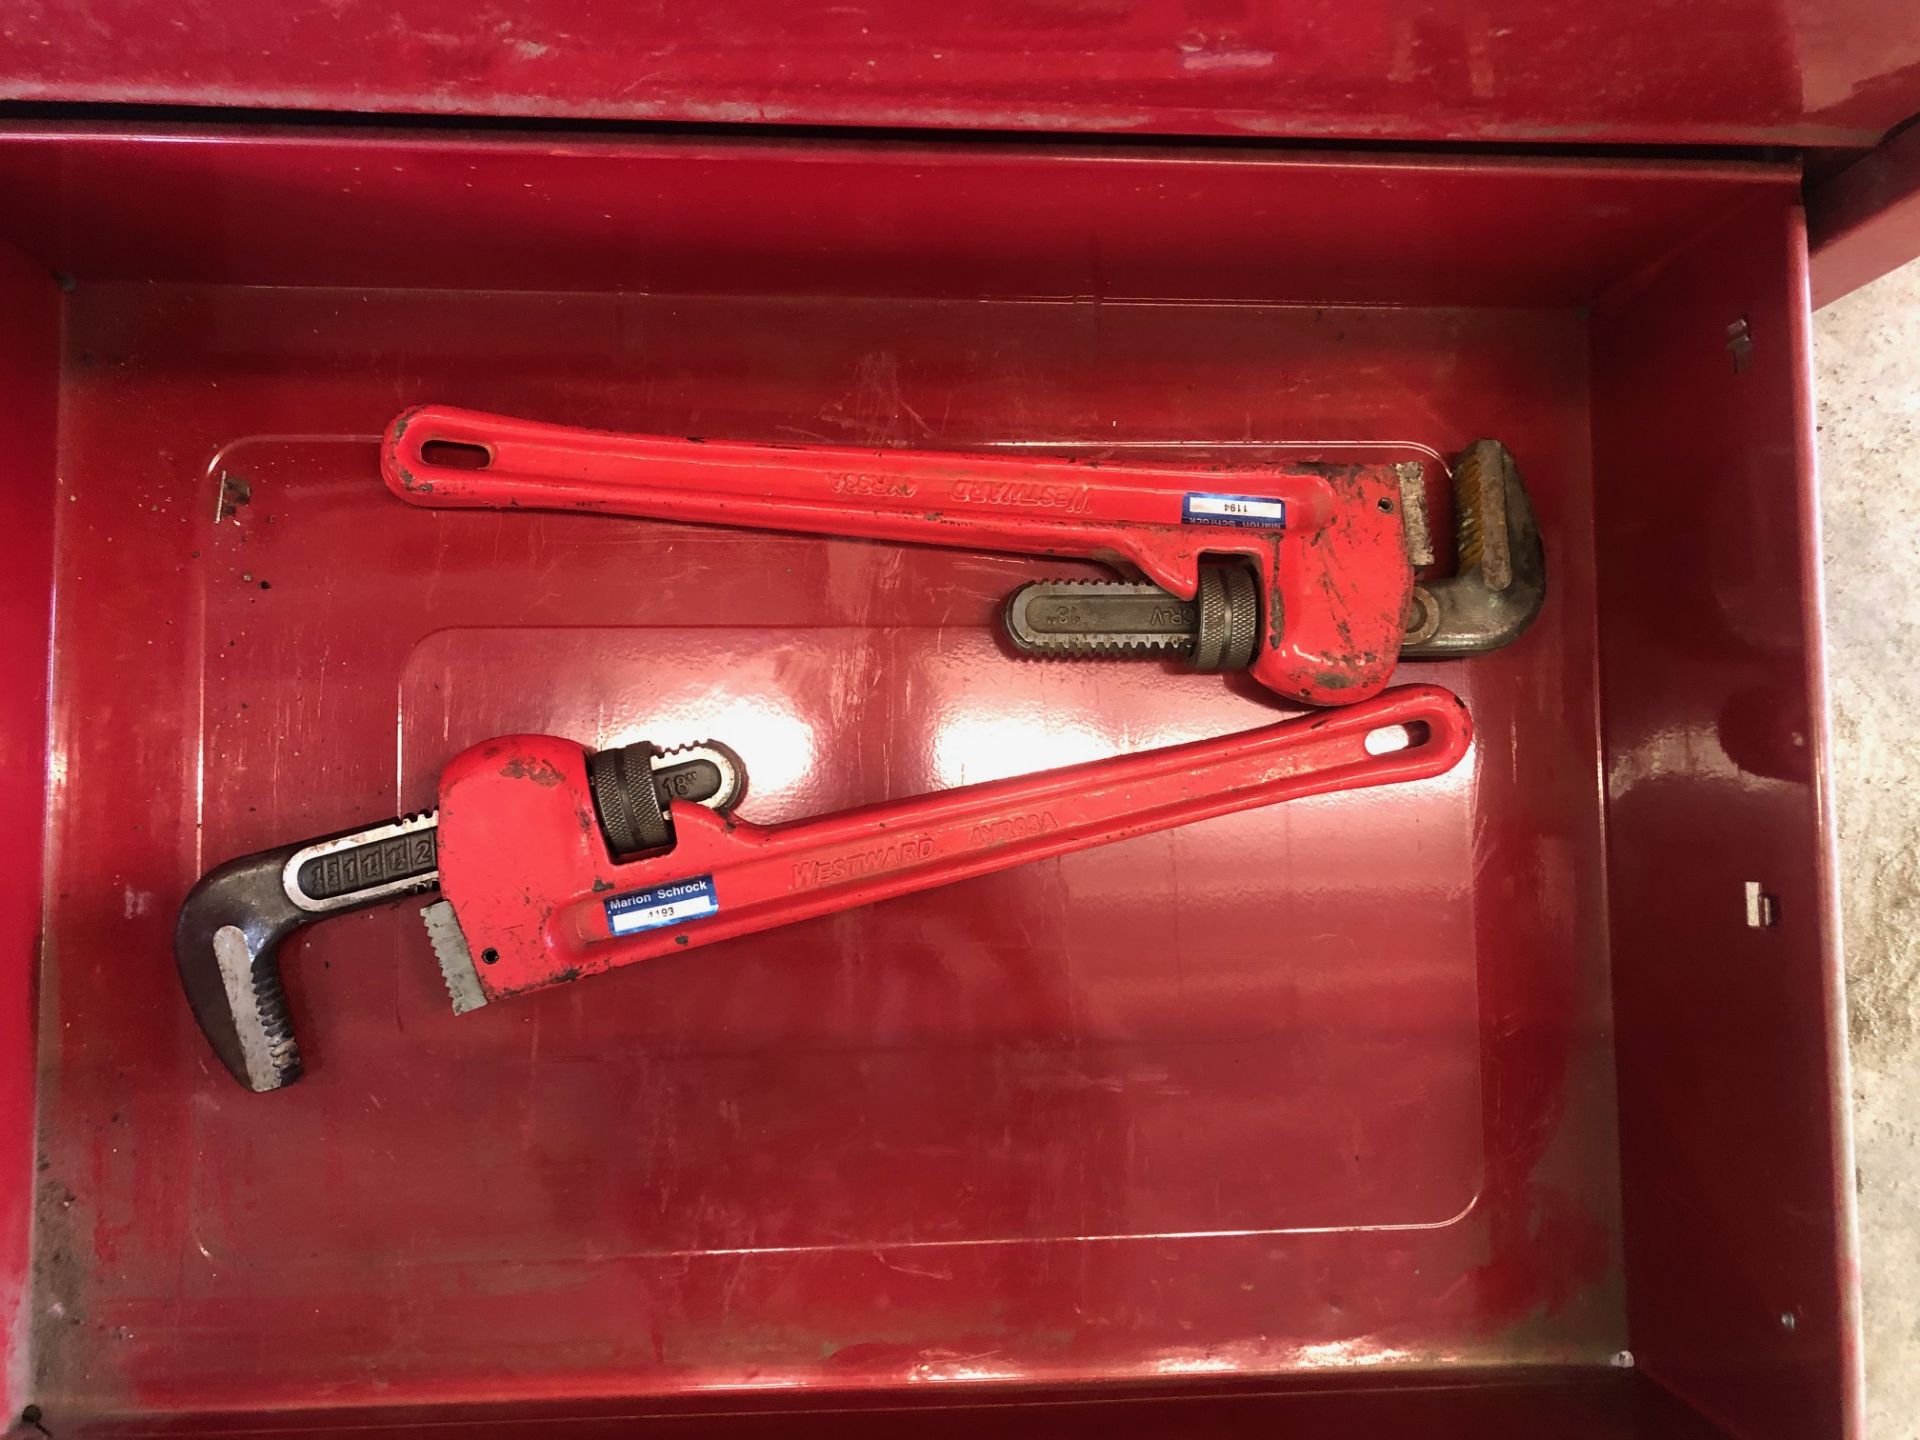 WESTWARD 5 DRAWER ROLLING TOOL BOX AND TOOLS - Image 3 of 6